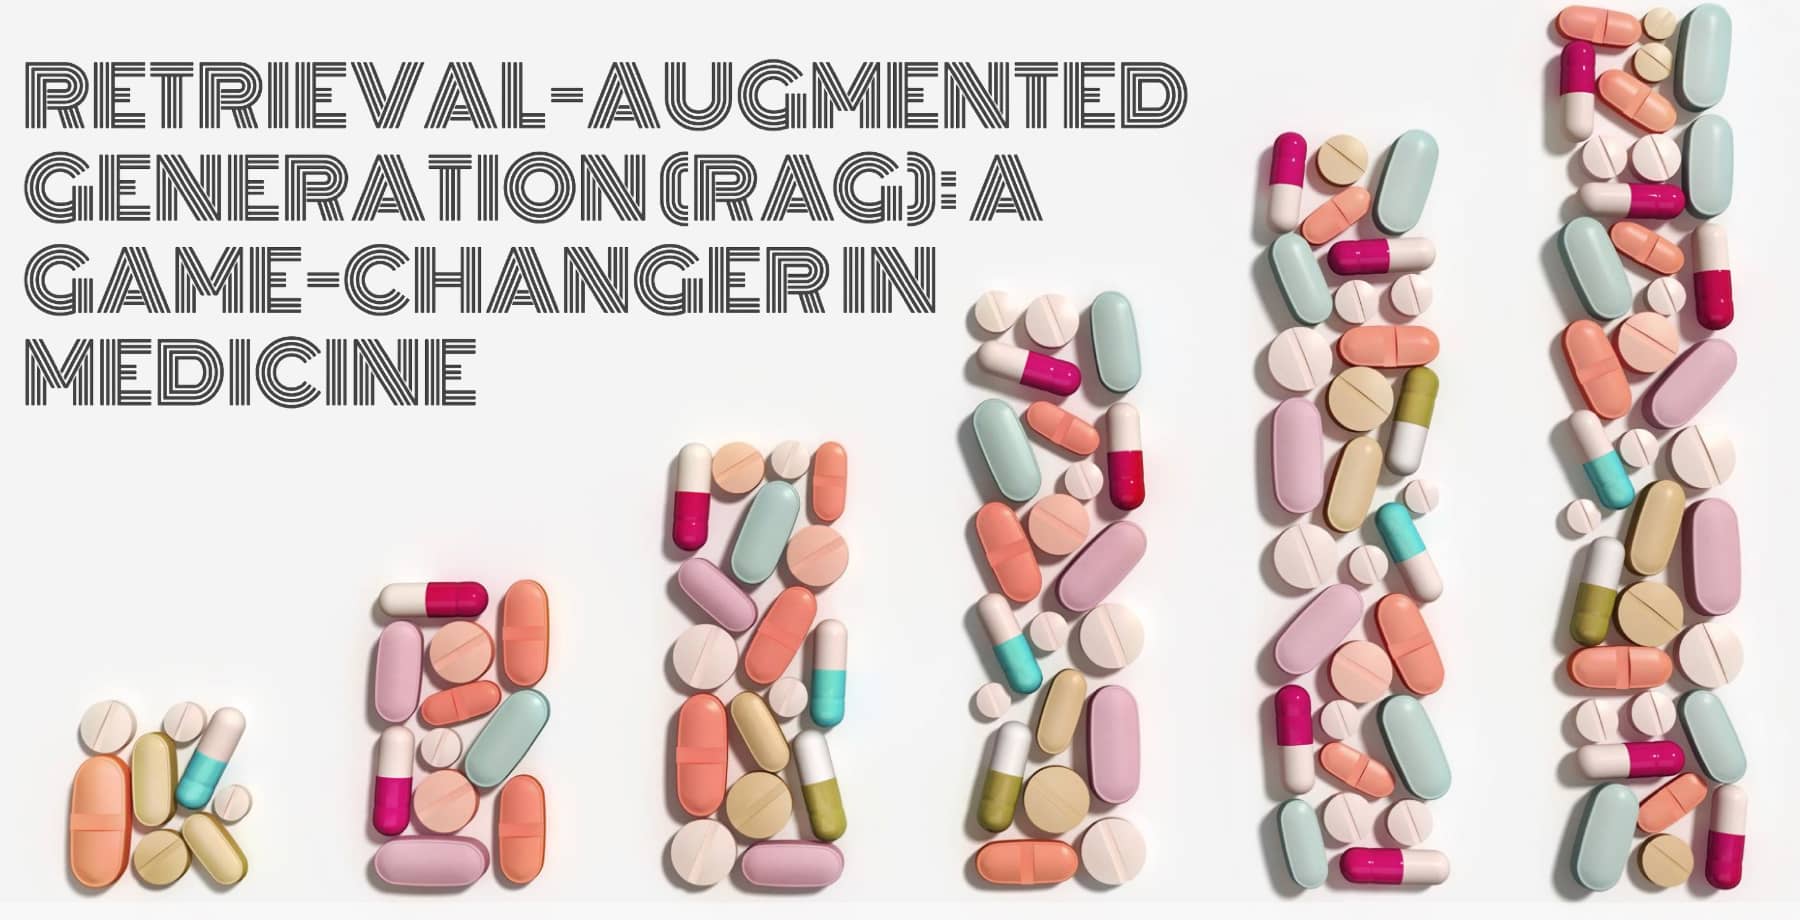 Retrieval-Augmented Generation (RAG): A Game-Changer in Medicine